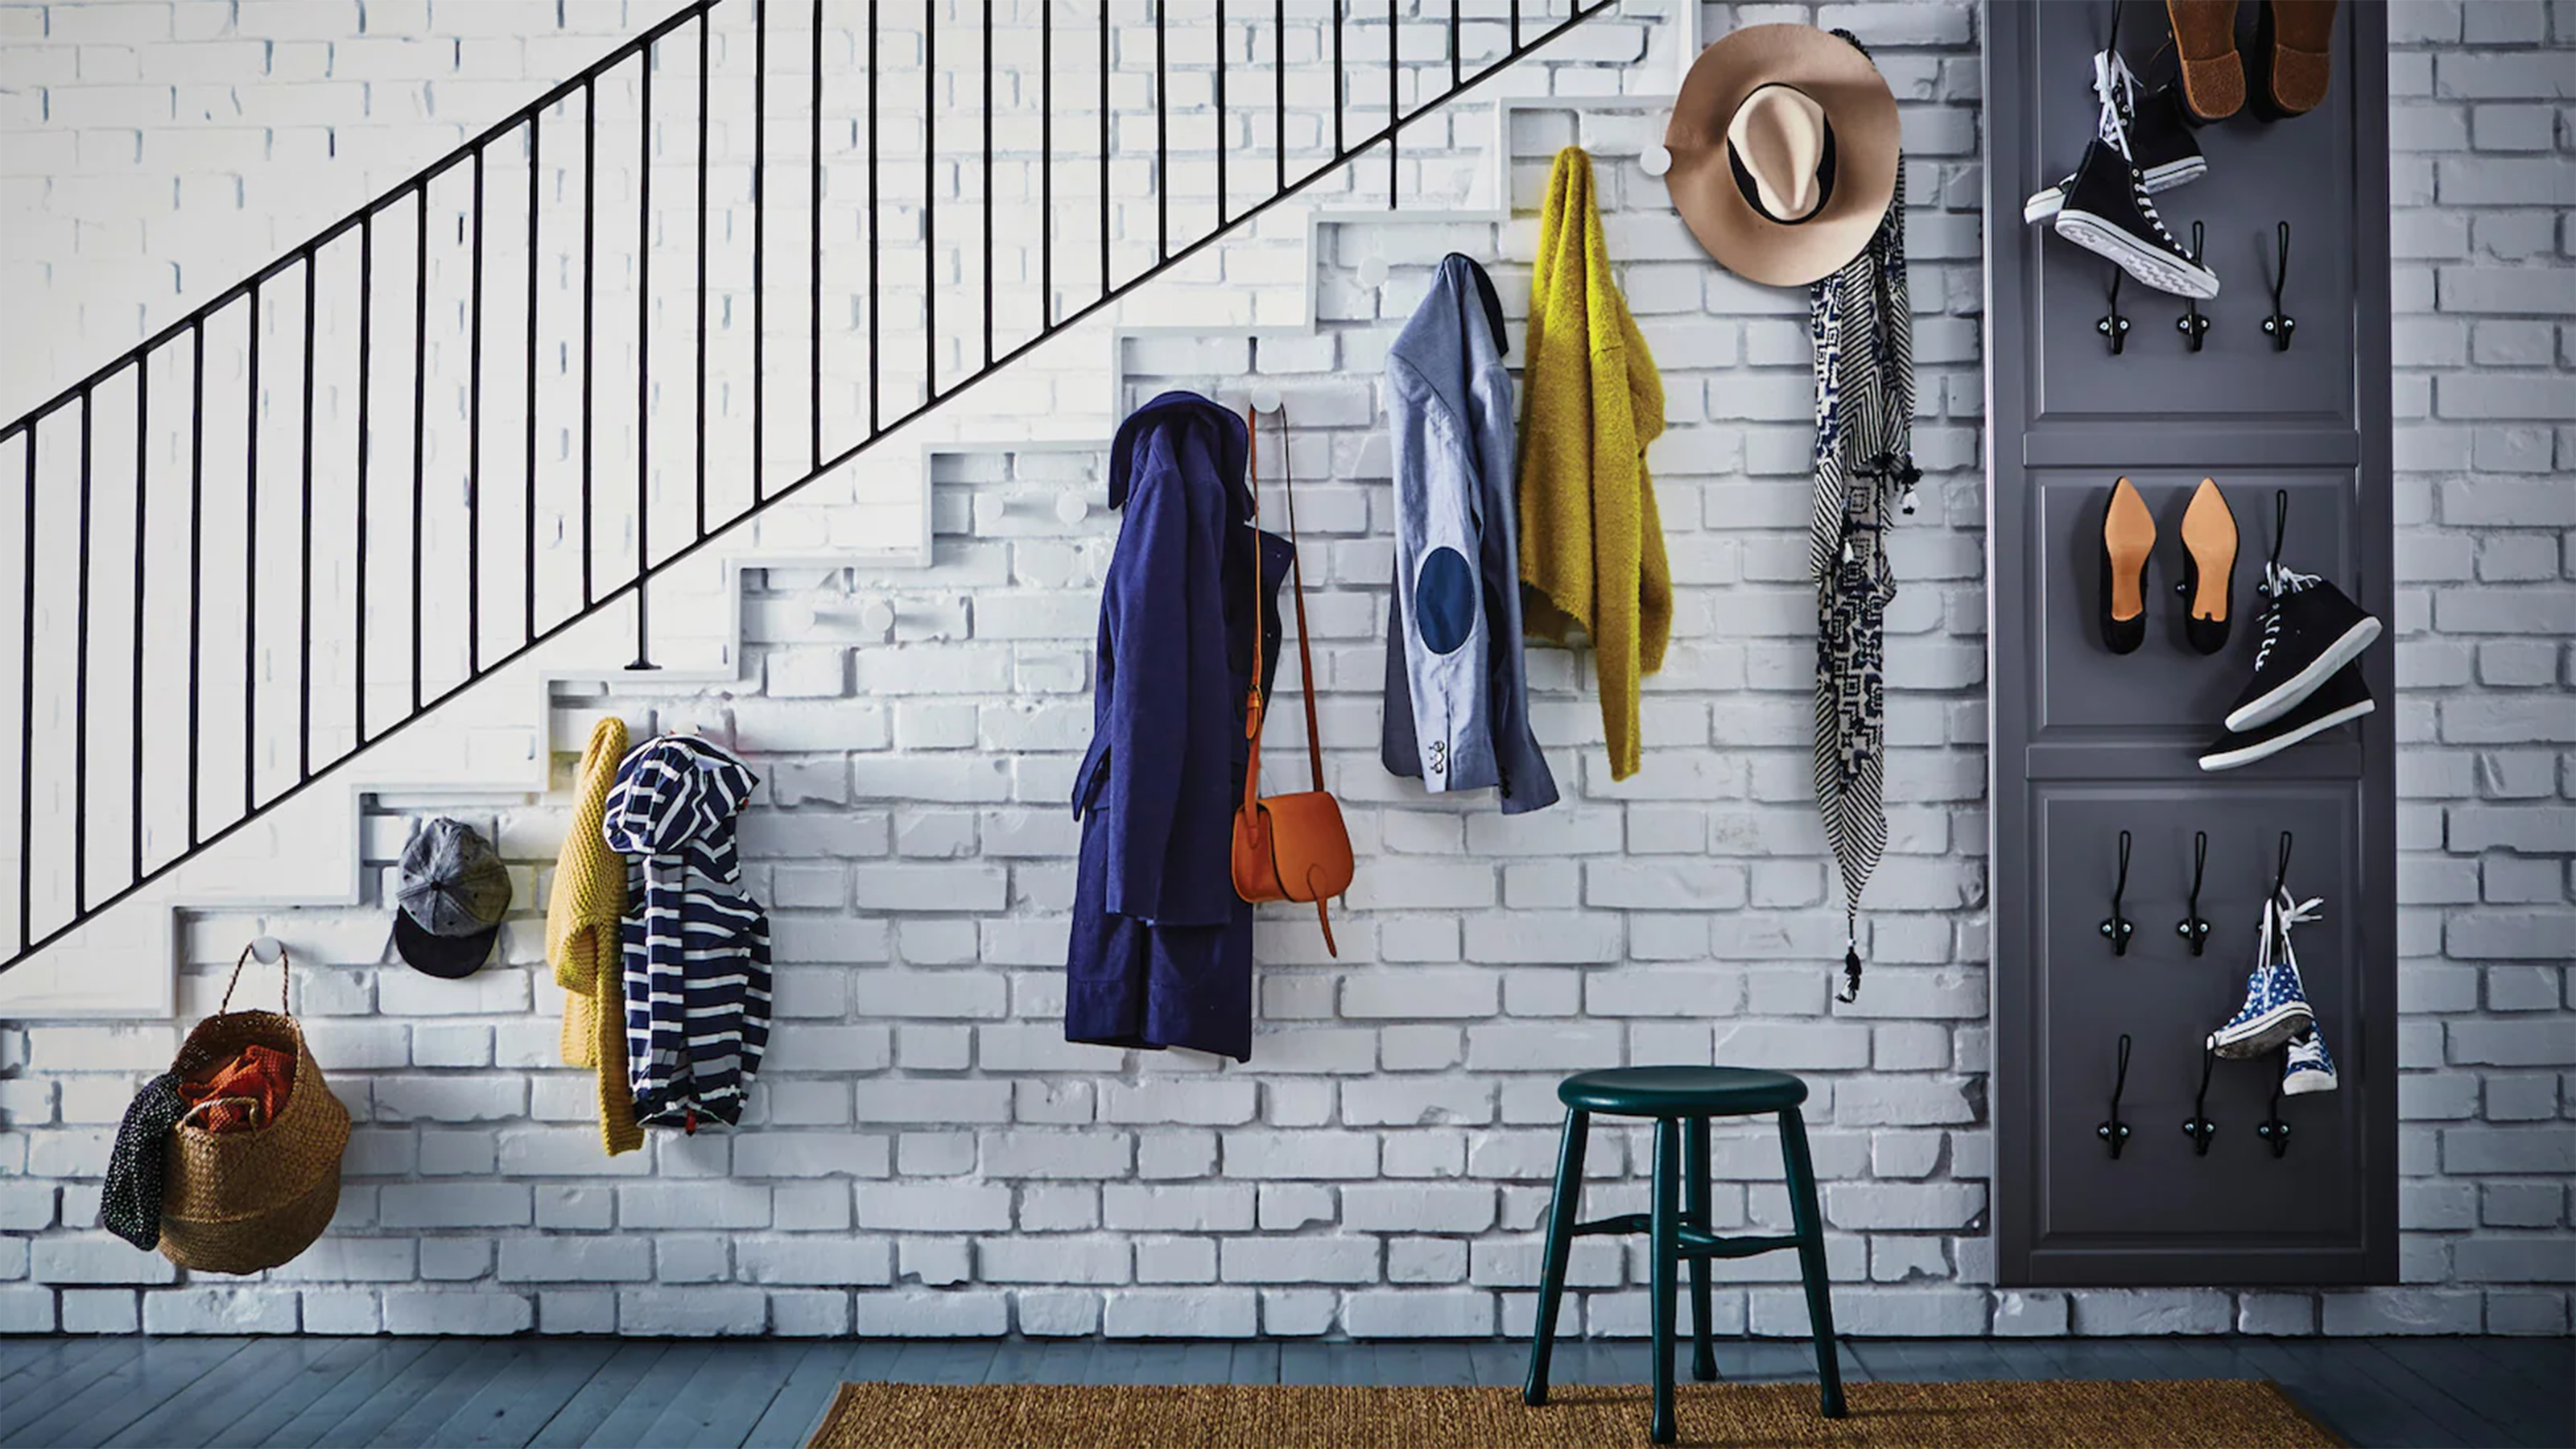 How to Turn Your Under-the-Stairs Closet into a Wonderful Storage